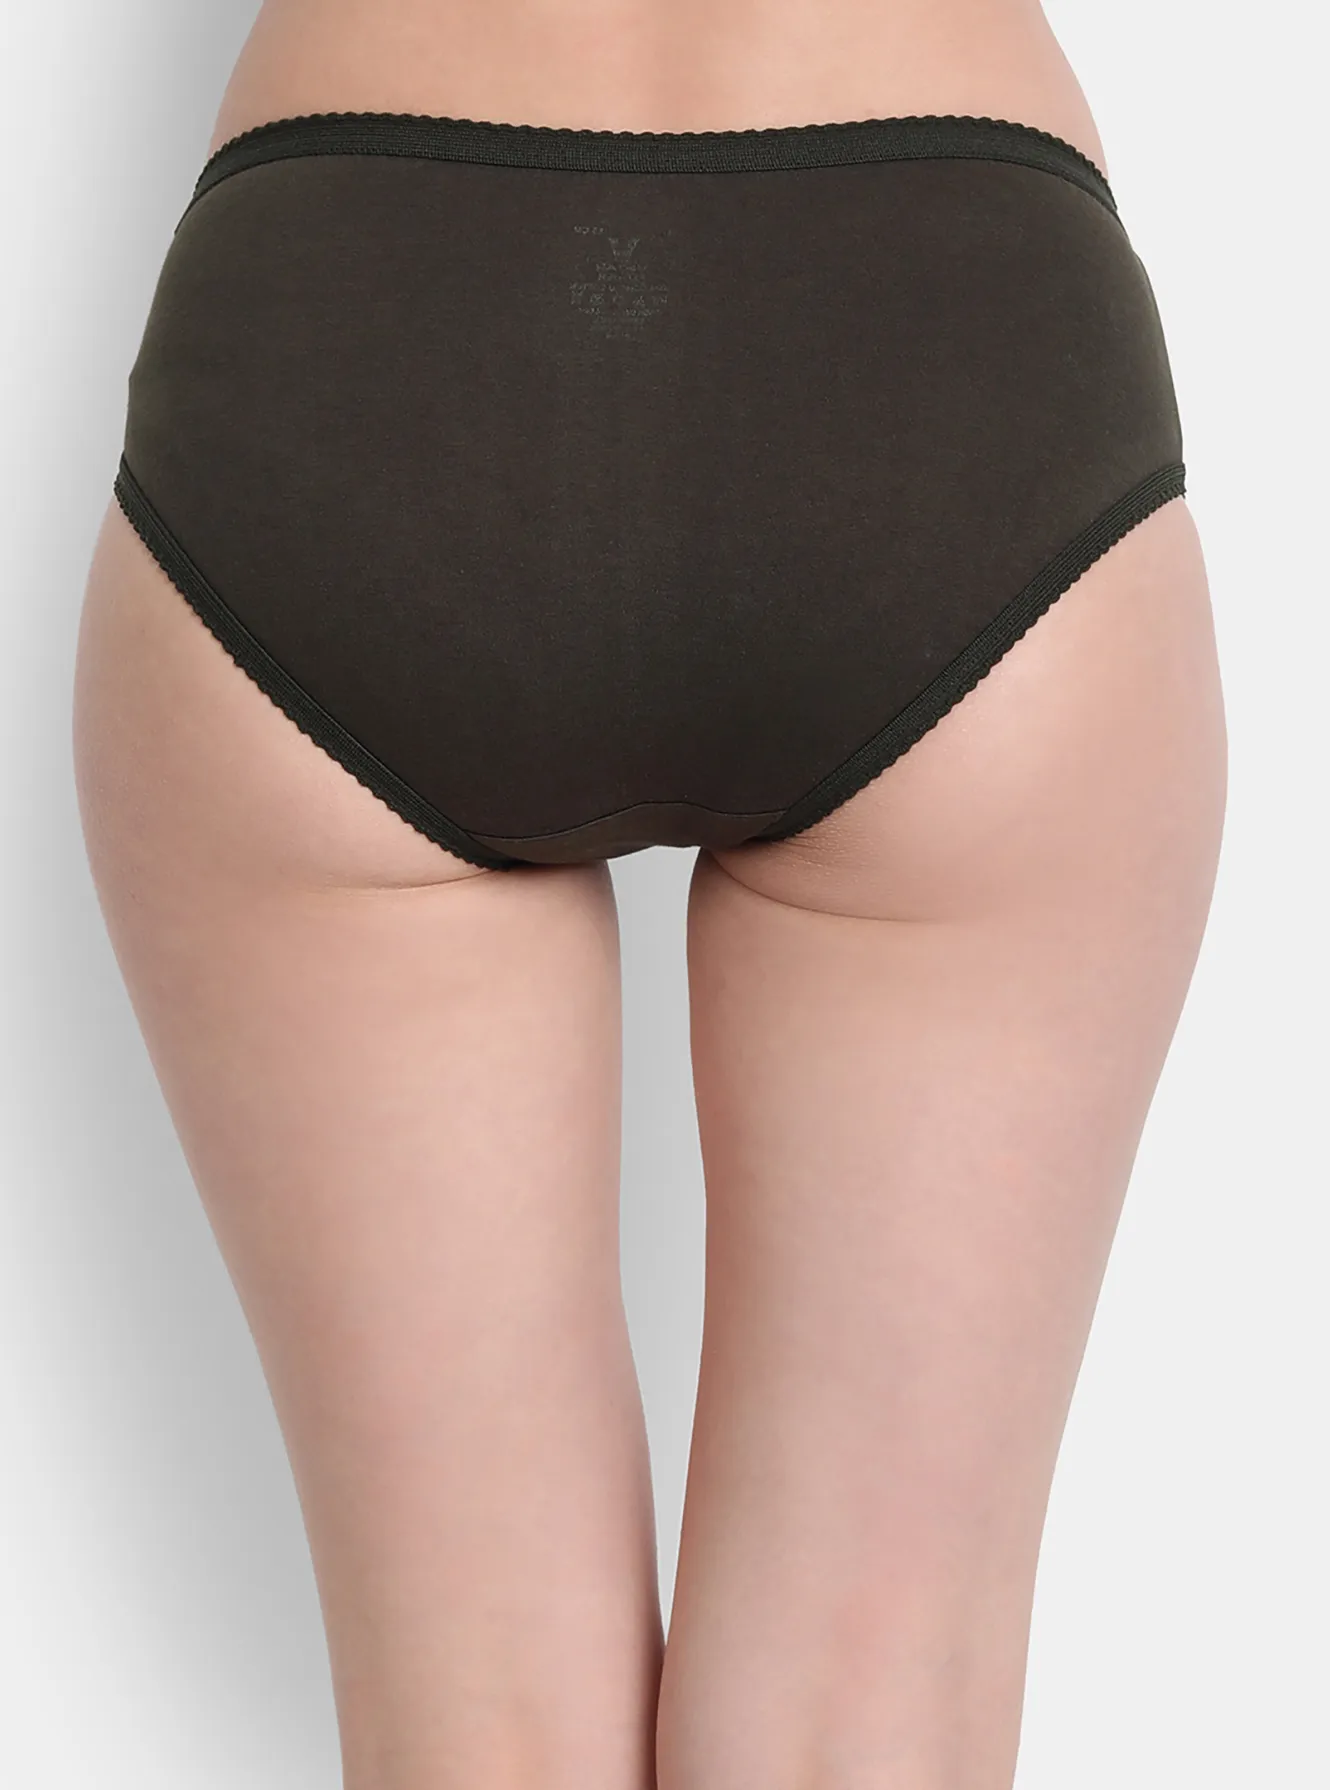 Mid rise, hipster cut panty with inner elastic waistband